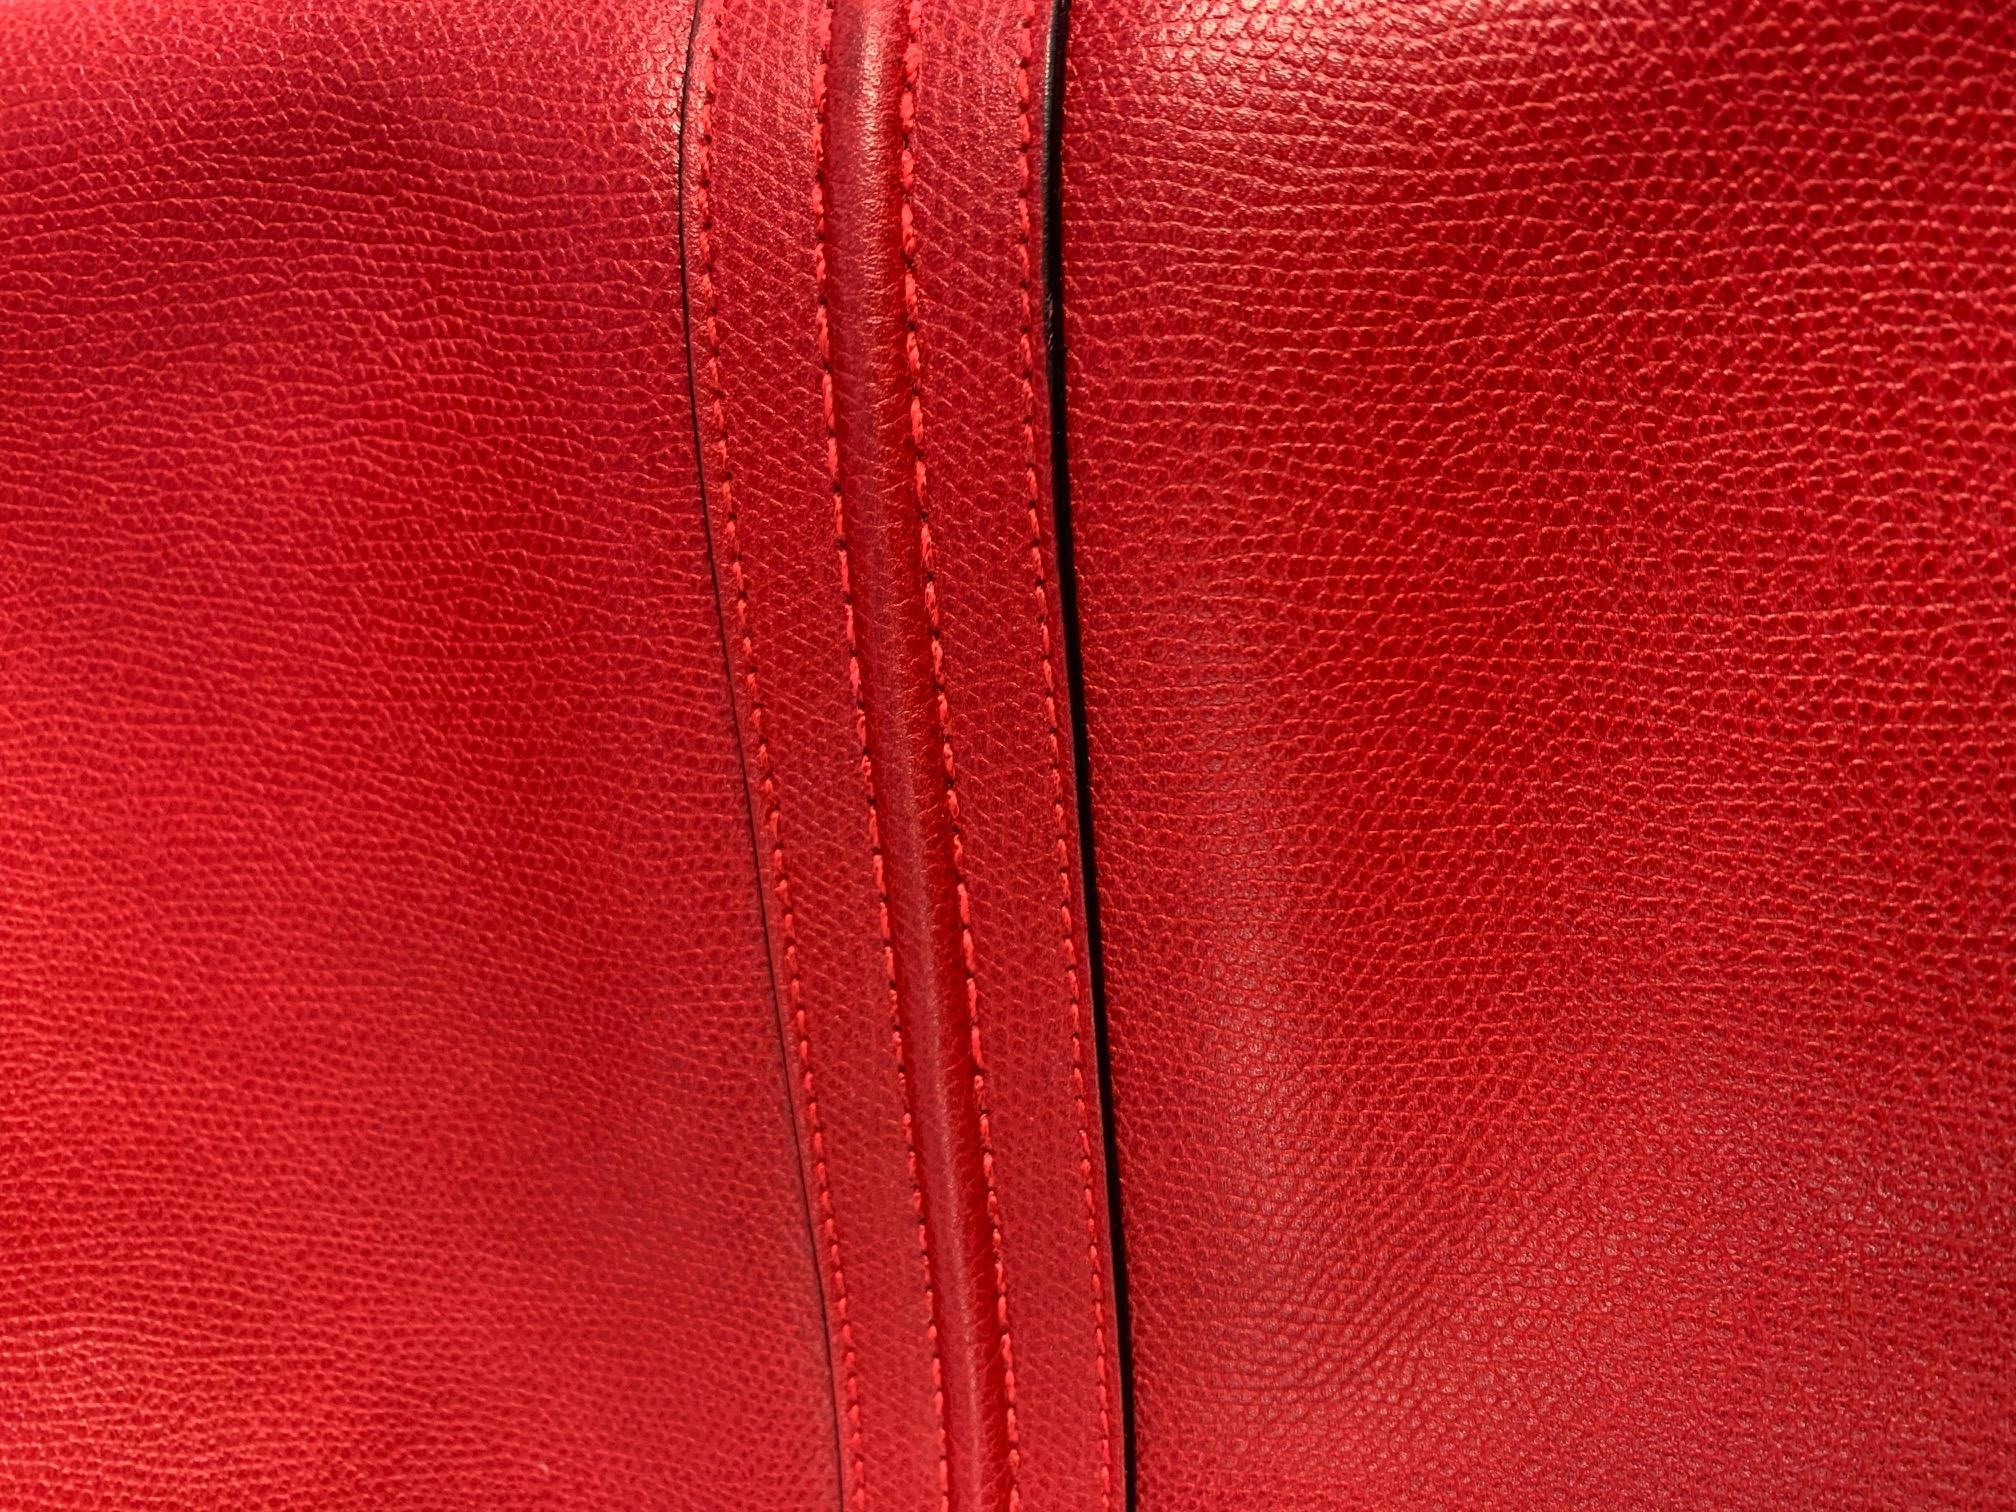 2000s Valextra Red Leather Bag 8